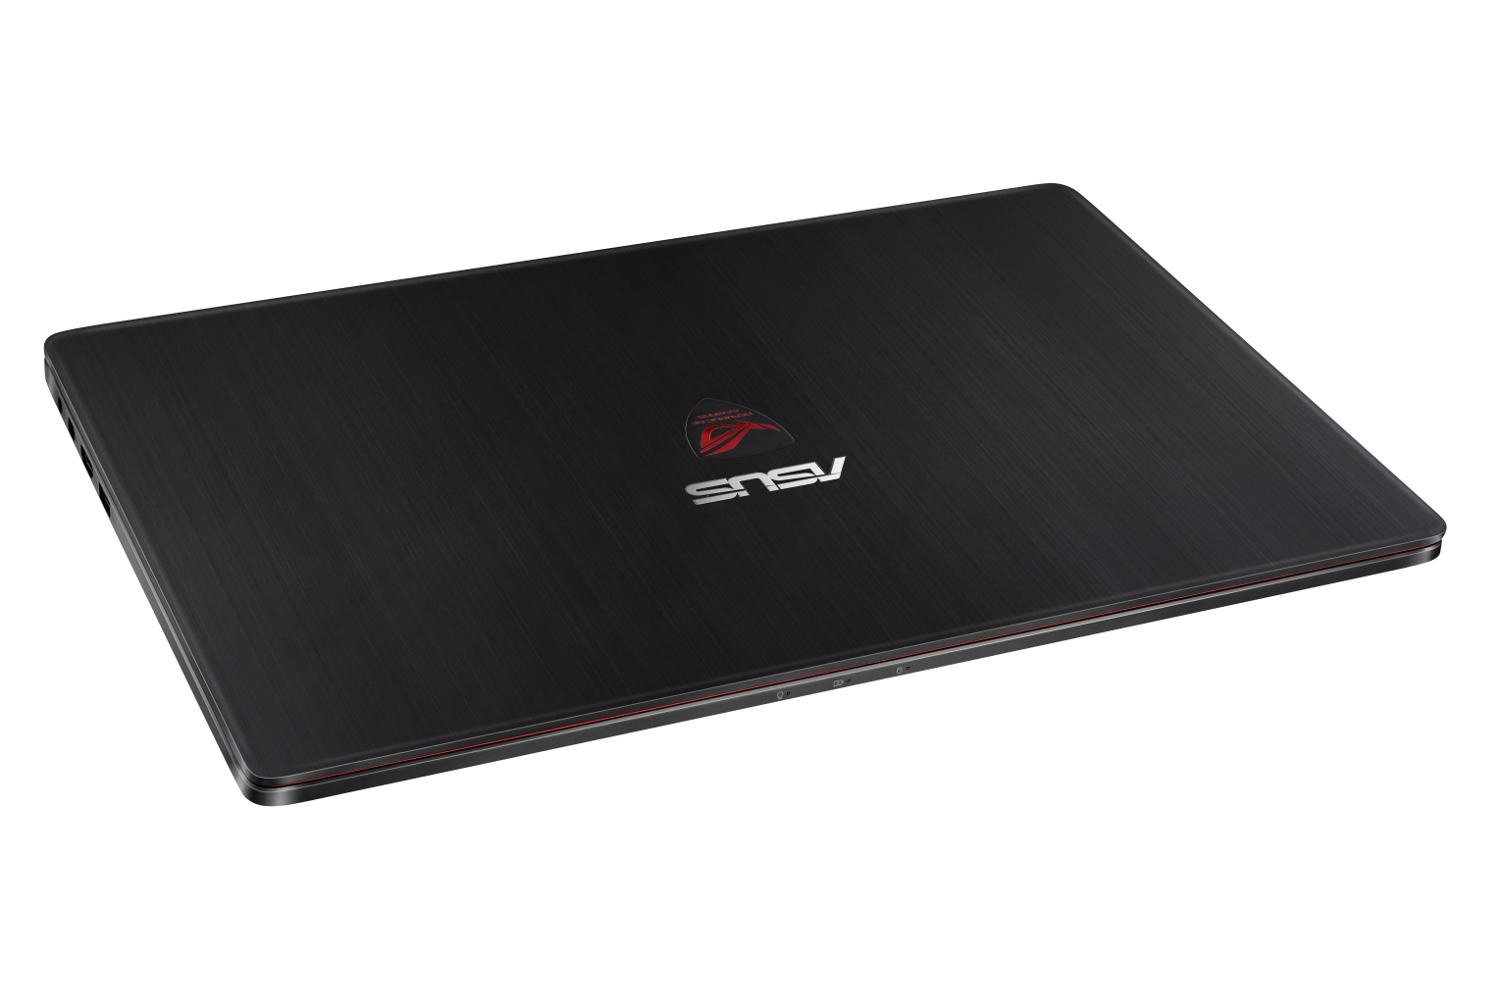 asus announces new lightweight g501 gaming laptop left top